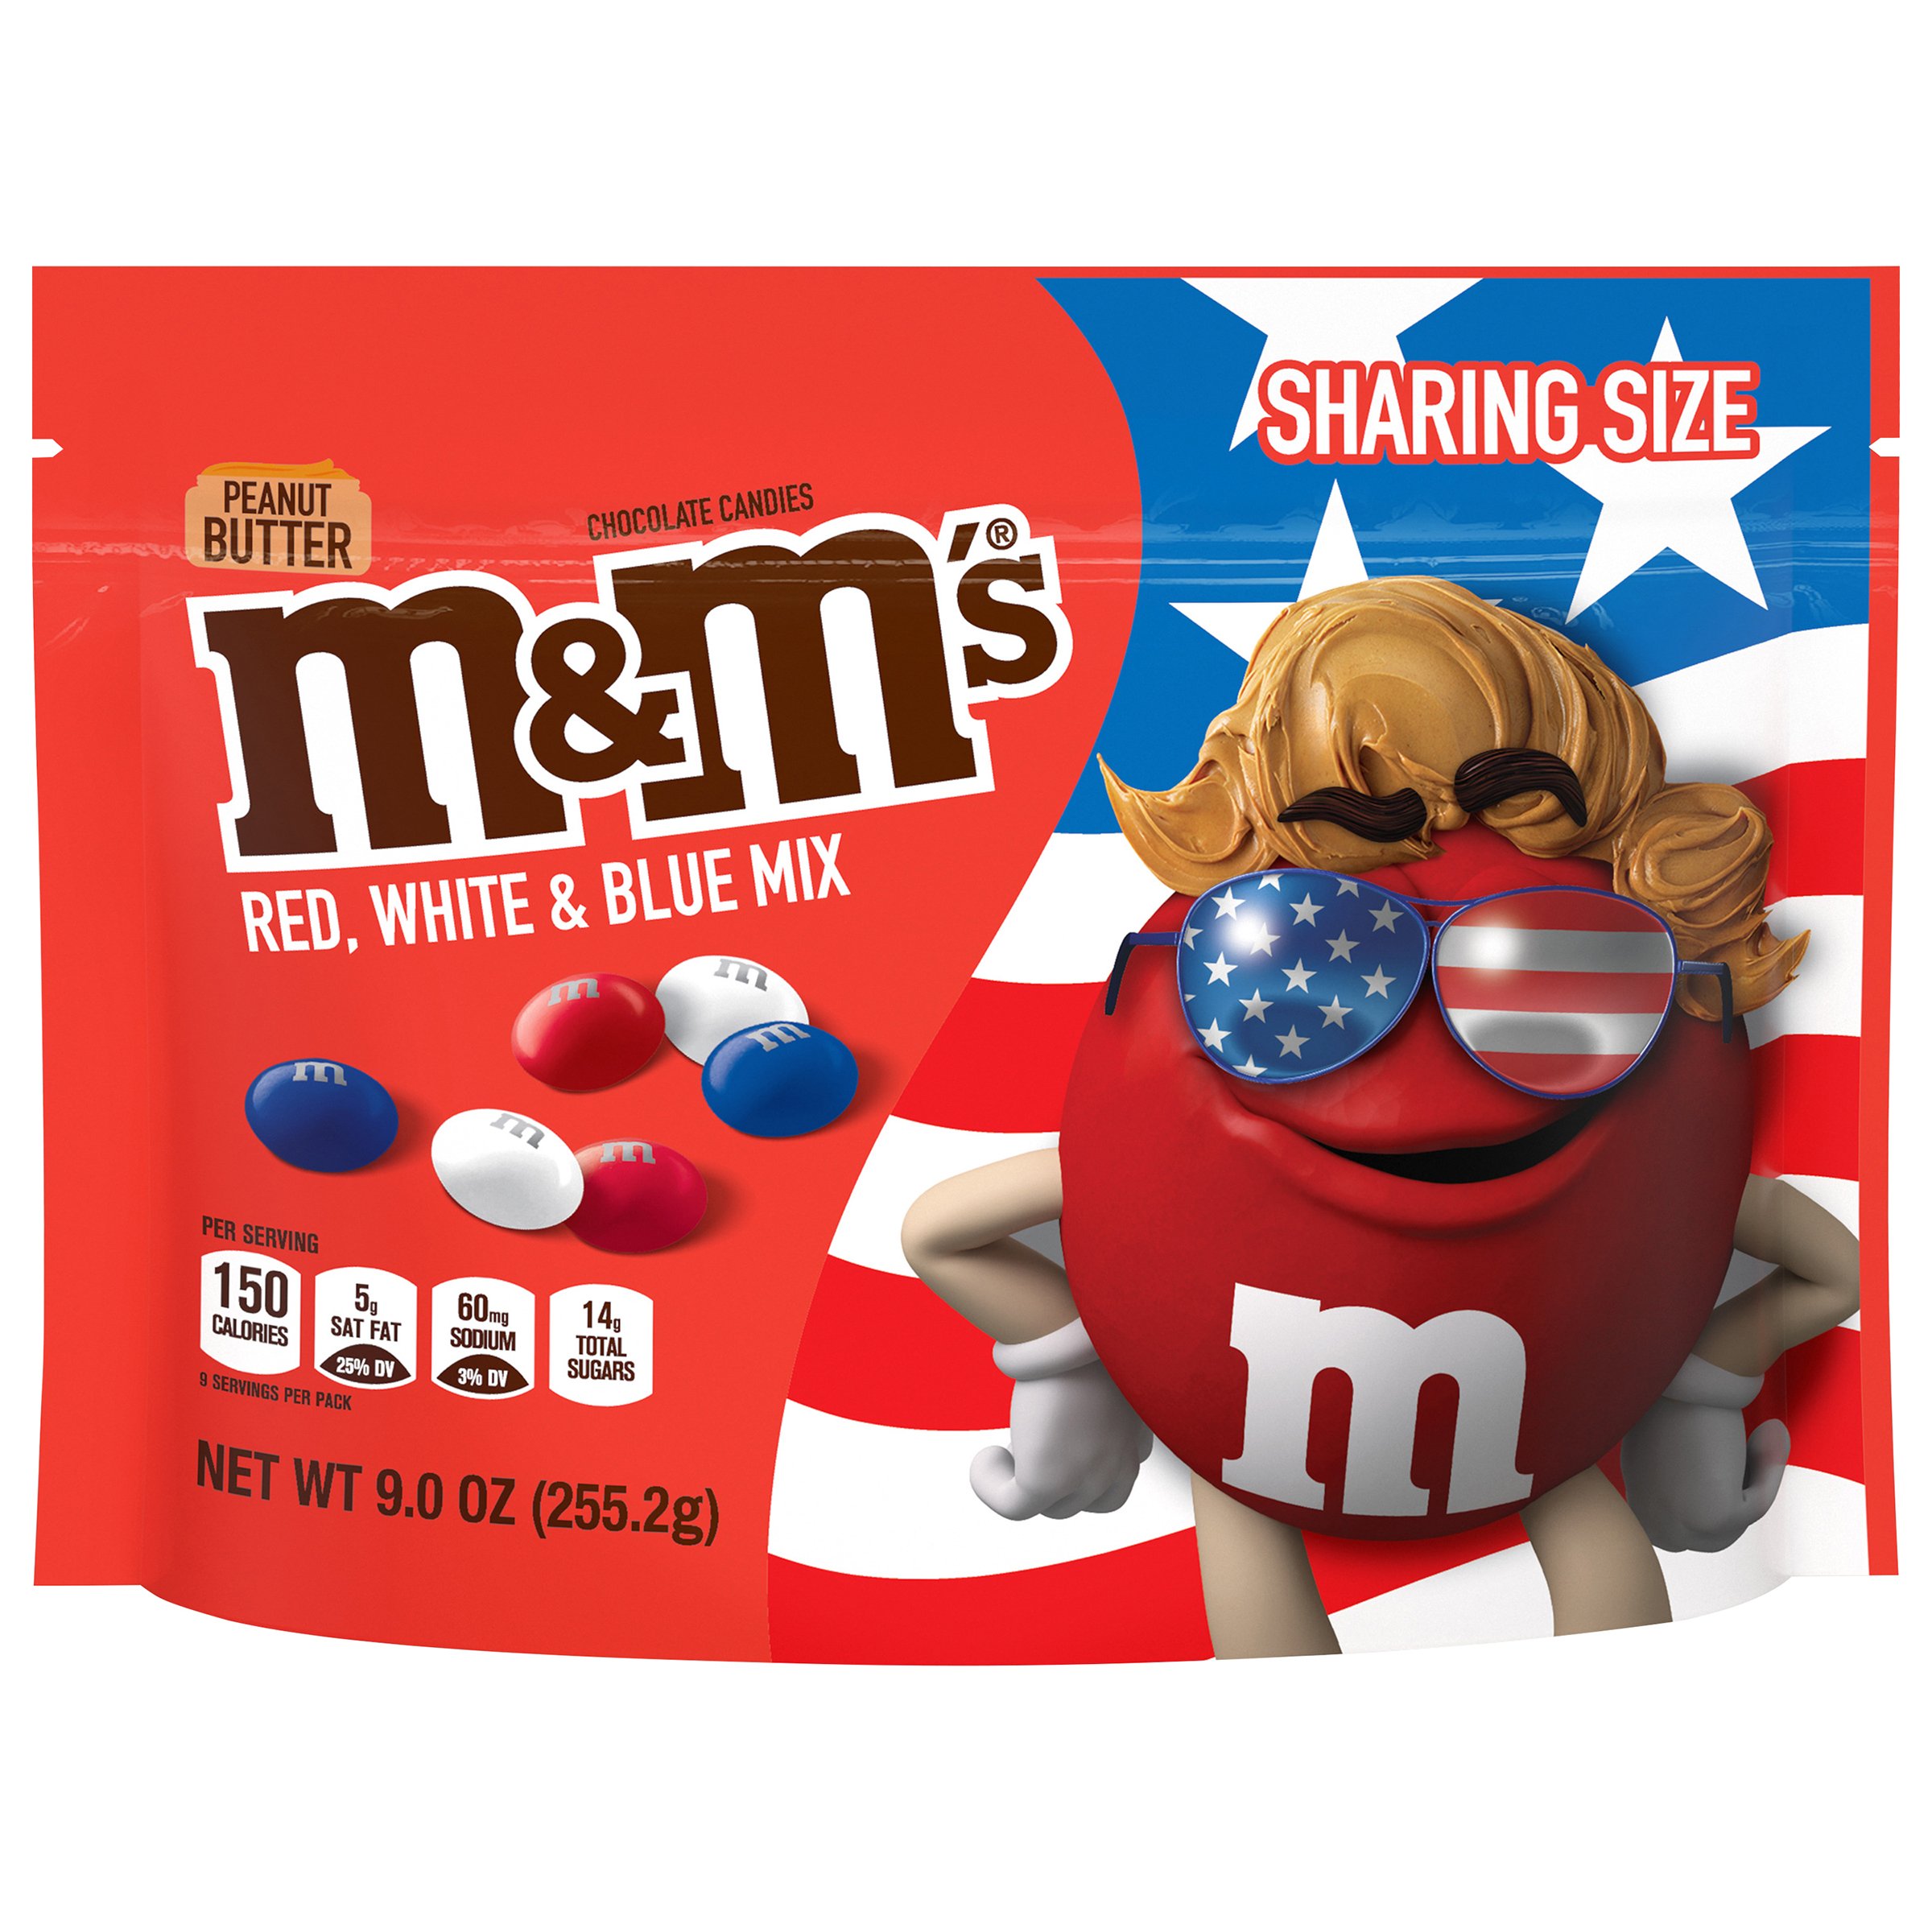 M&M's Red, White & Blue Patriotic Peanut Butter Chocolate Candy Sharing Size